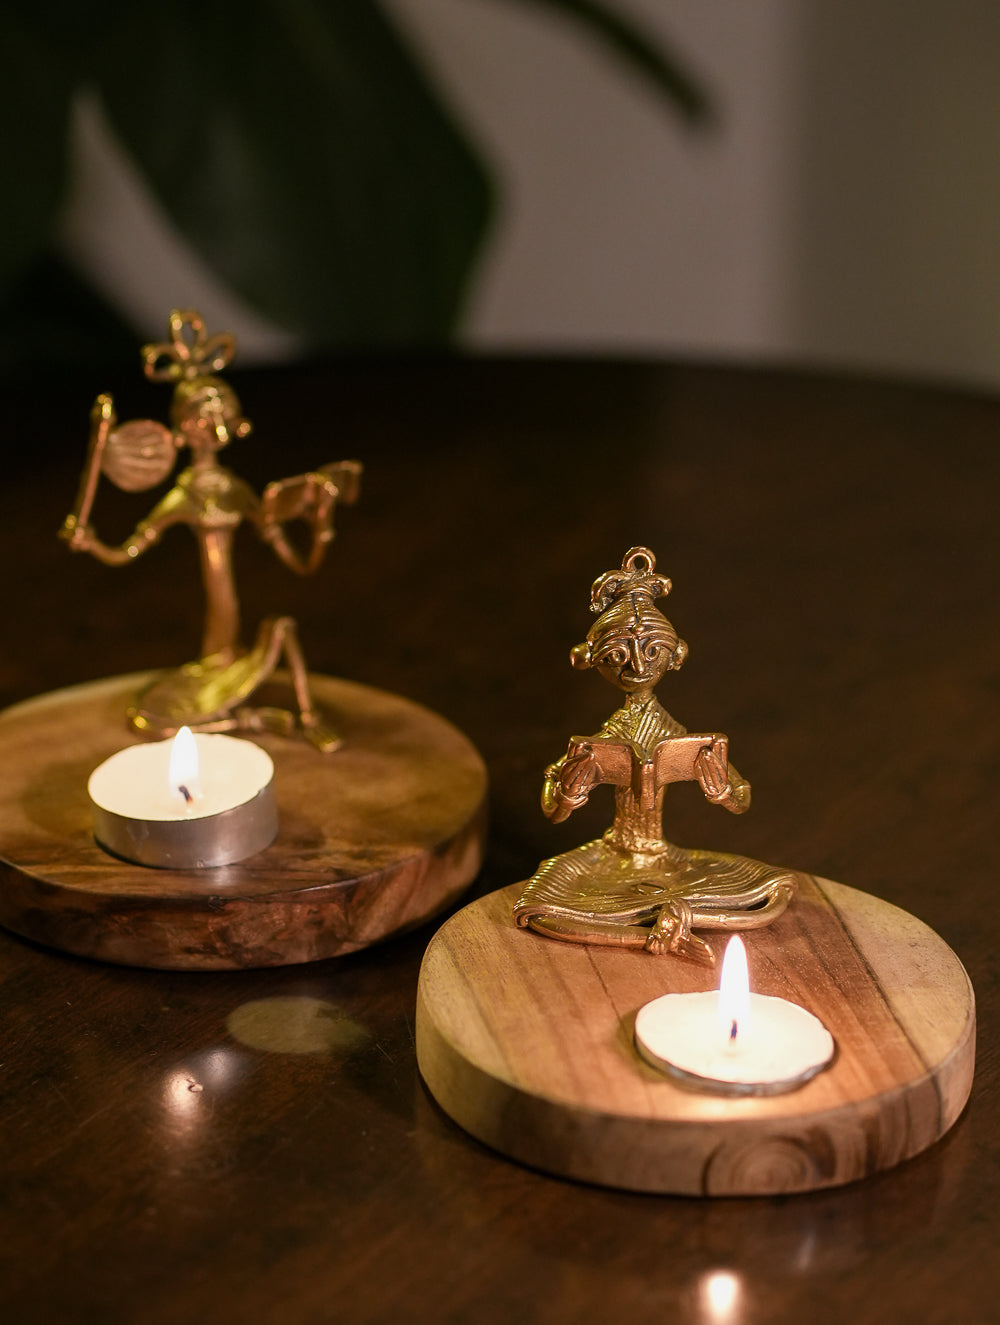 Load image into Gallery viewer, Wood &amp; Dhokra Craft Tealight Holders (Set of 2) - Women &amp; Books